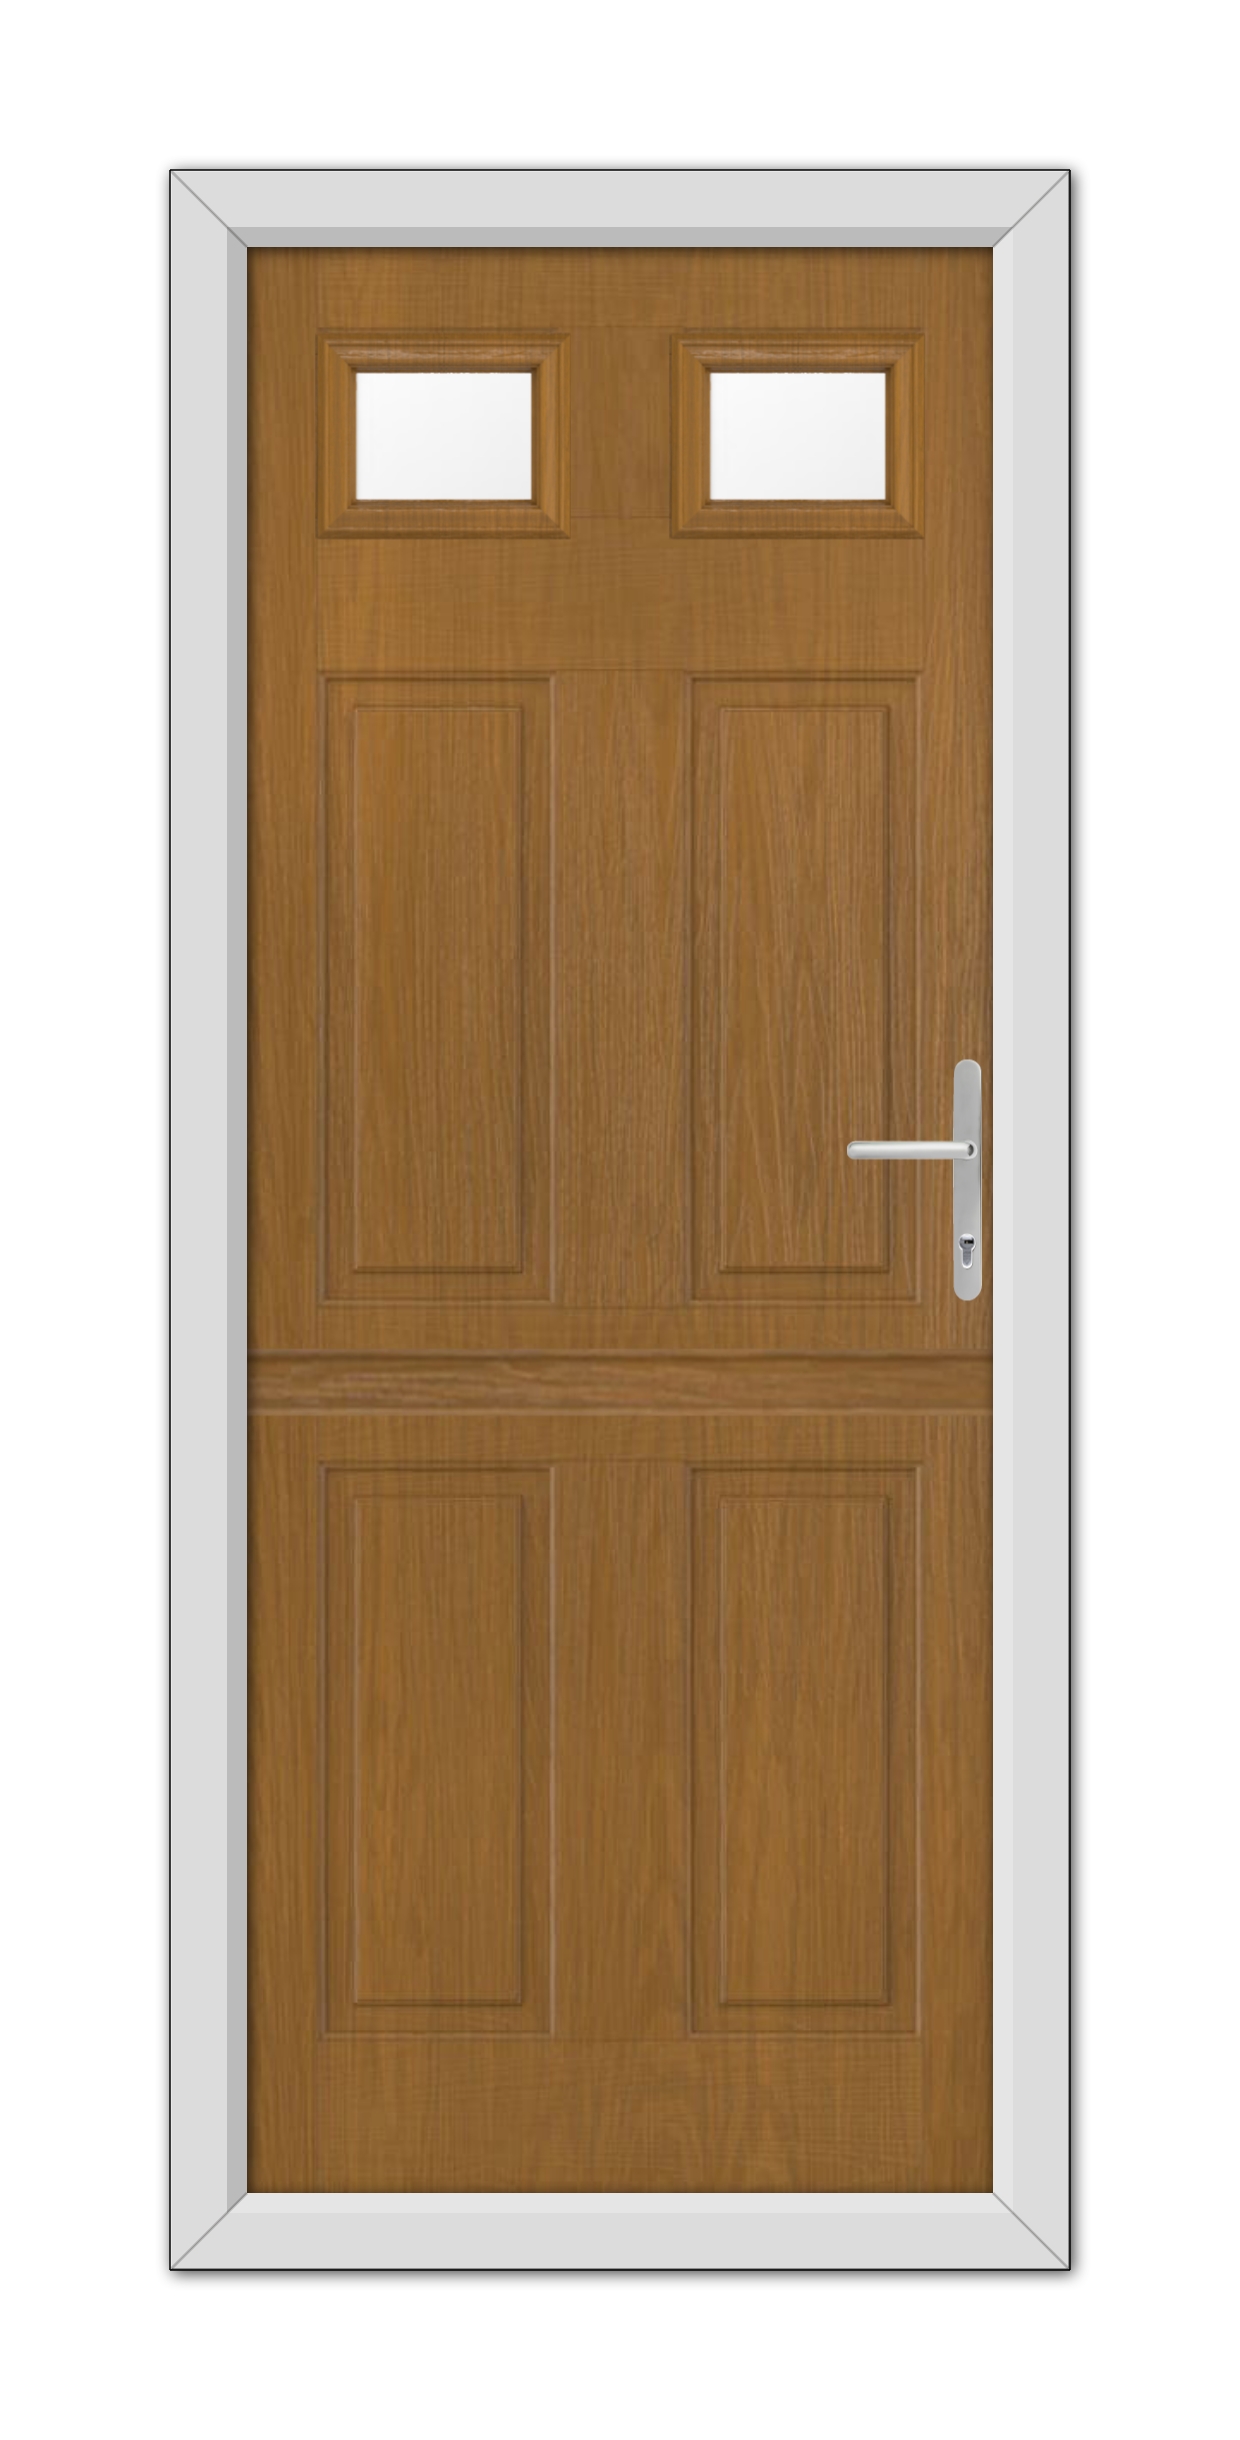 Oak Middleton Glazed 2 Stable Composite Door 48mm Timber Core with two square windows at the top and a metal handle, set in a white frame.